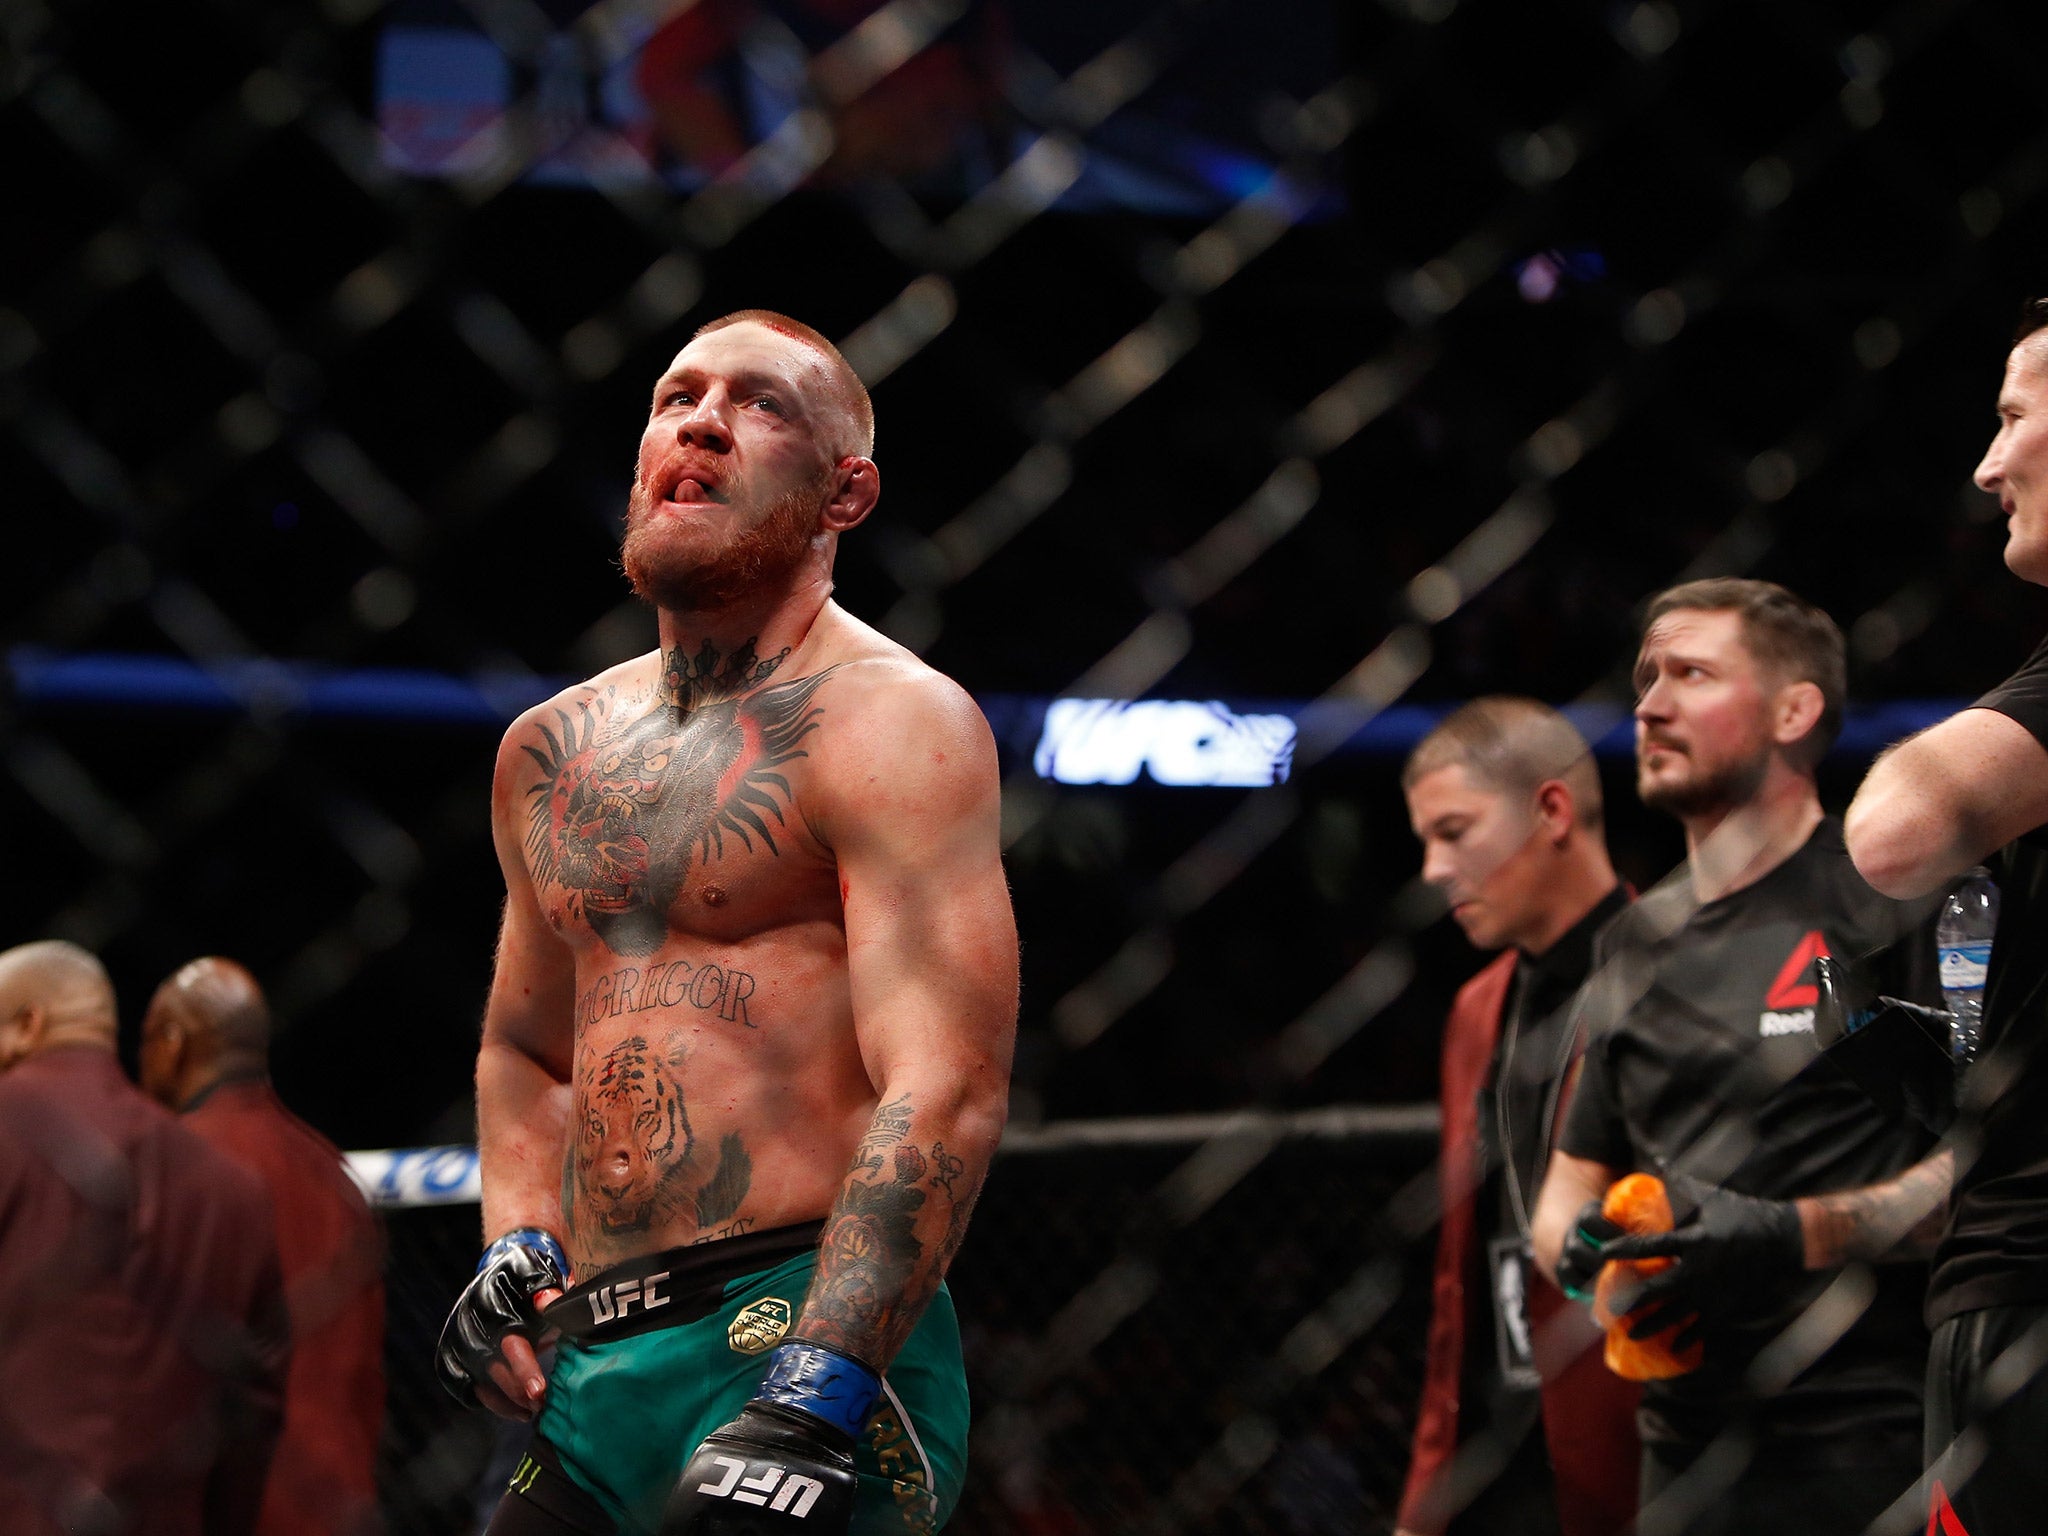 Conor McGregor reacts at the end of his fight with Nate Diaz